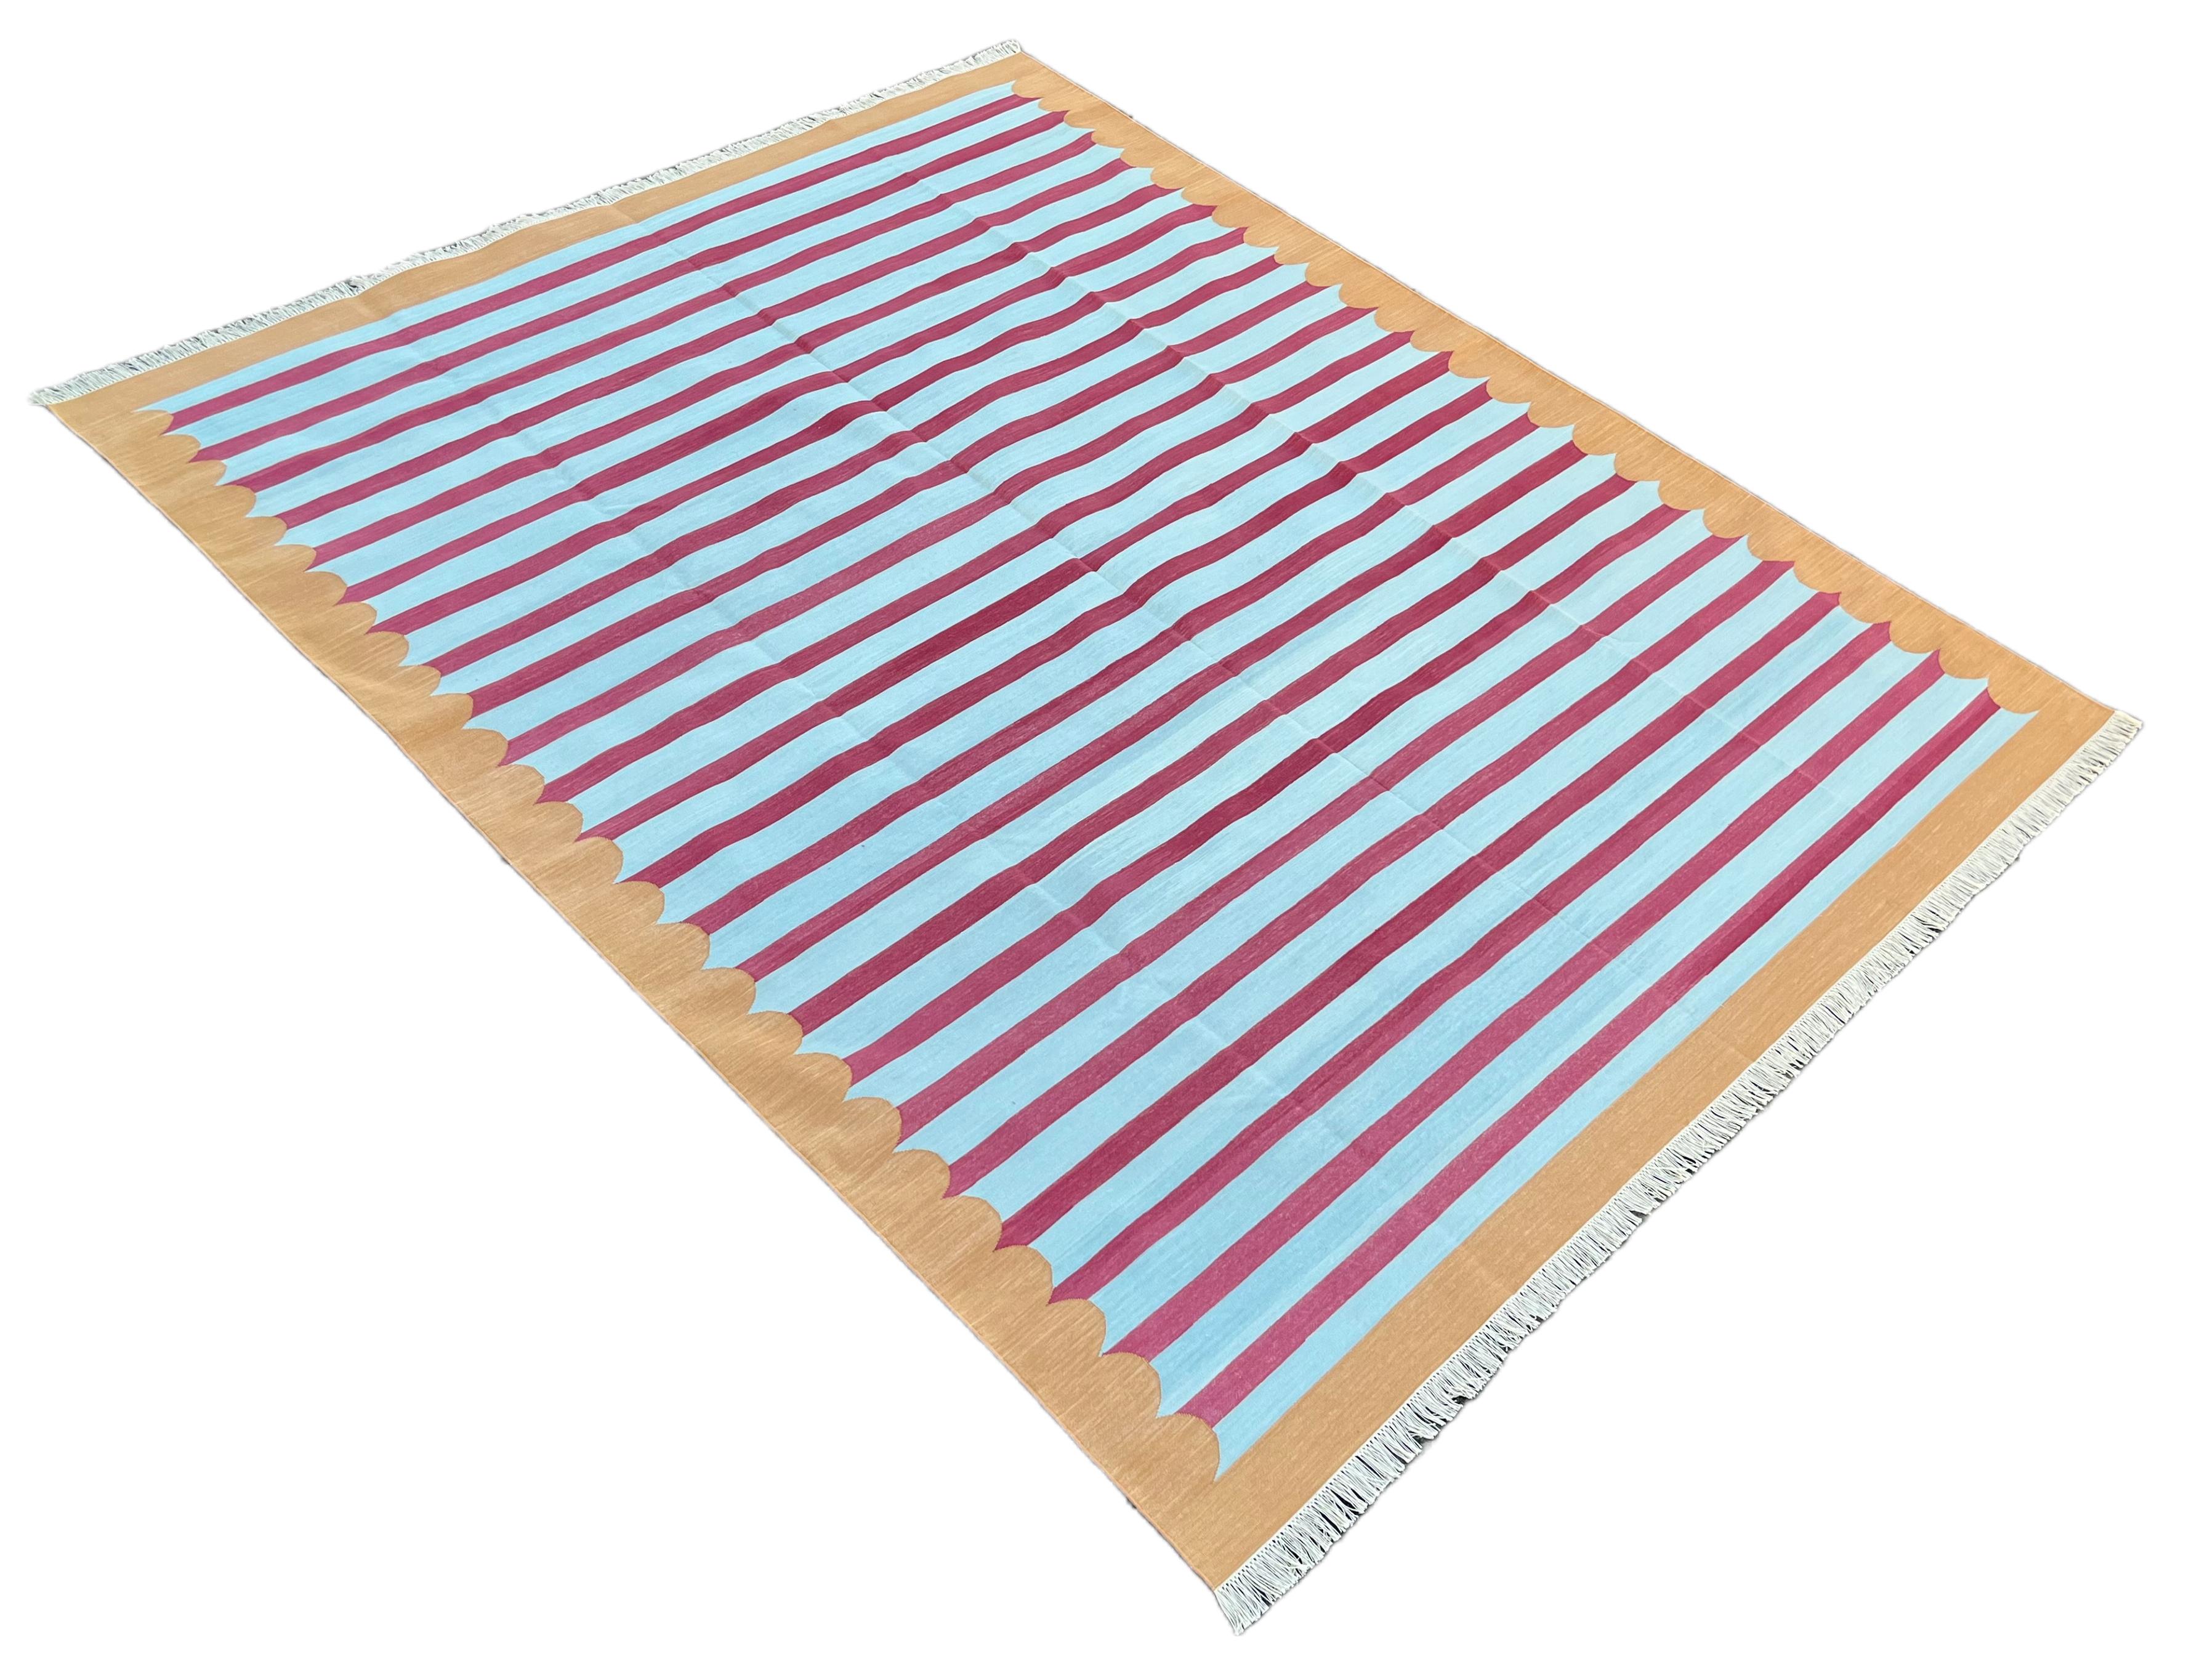 Mid-Century Modern Handmade Cotton Area Flat Weave Rug, 8x10 Blue, Tan, Pink Striped Indian Dhurrie For Sale